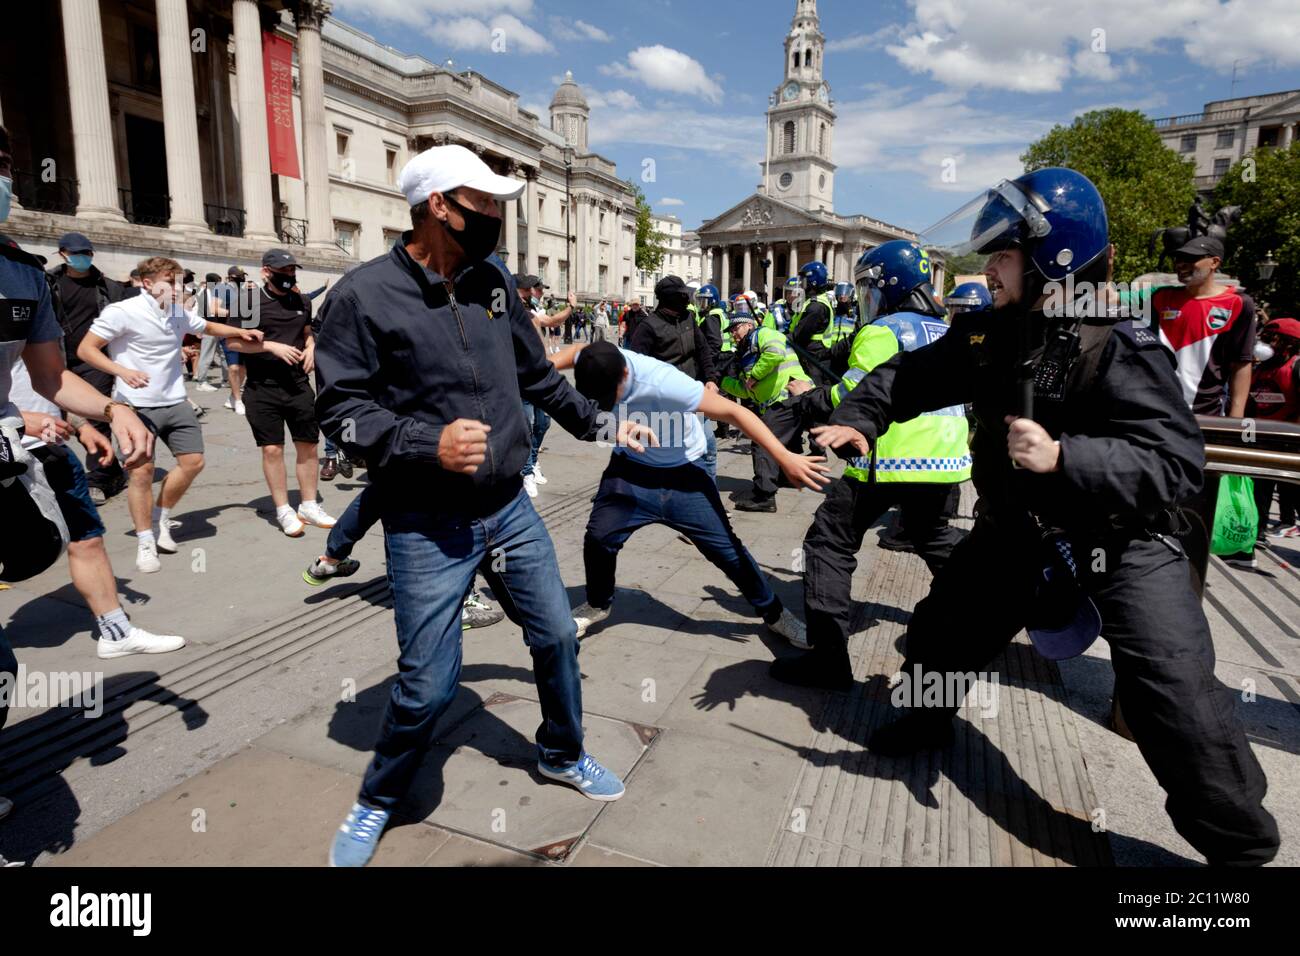 The police confront a right wing mob attempting to disrupt a Black Lives Matter protest in Trafalgar Square Stock Photo